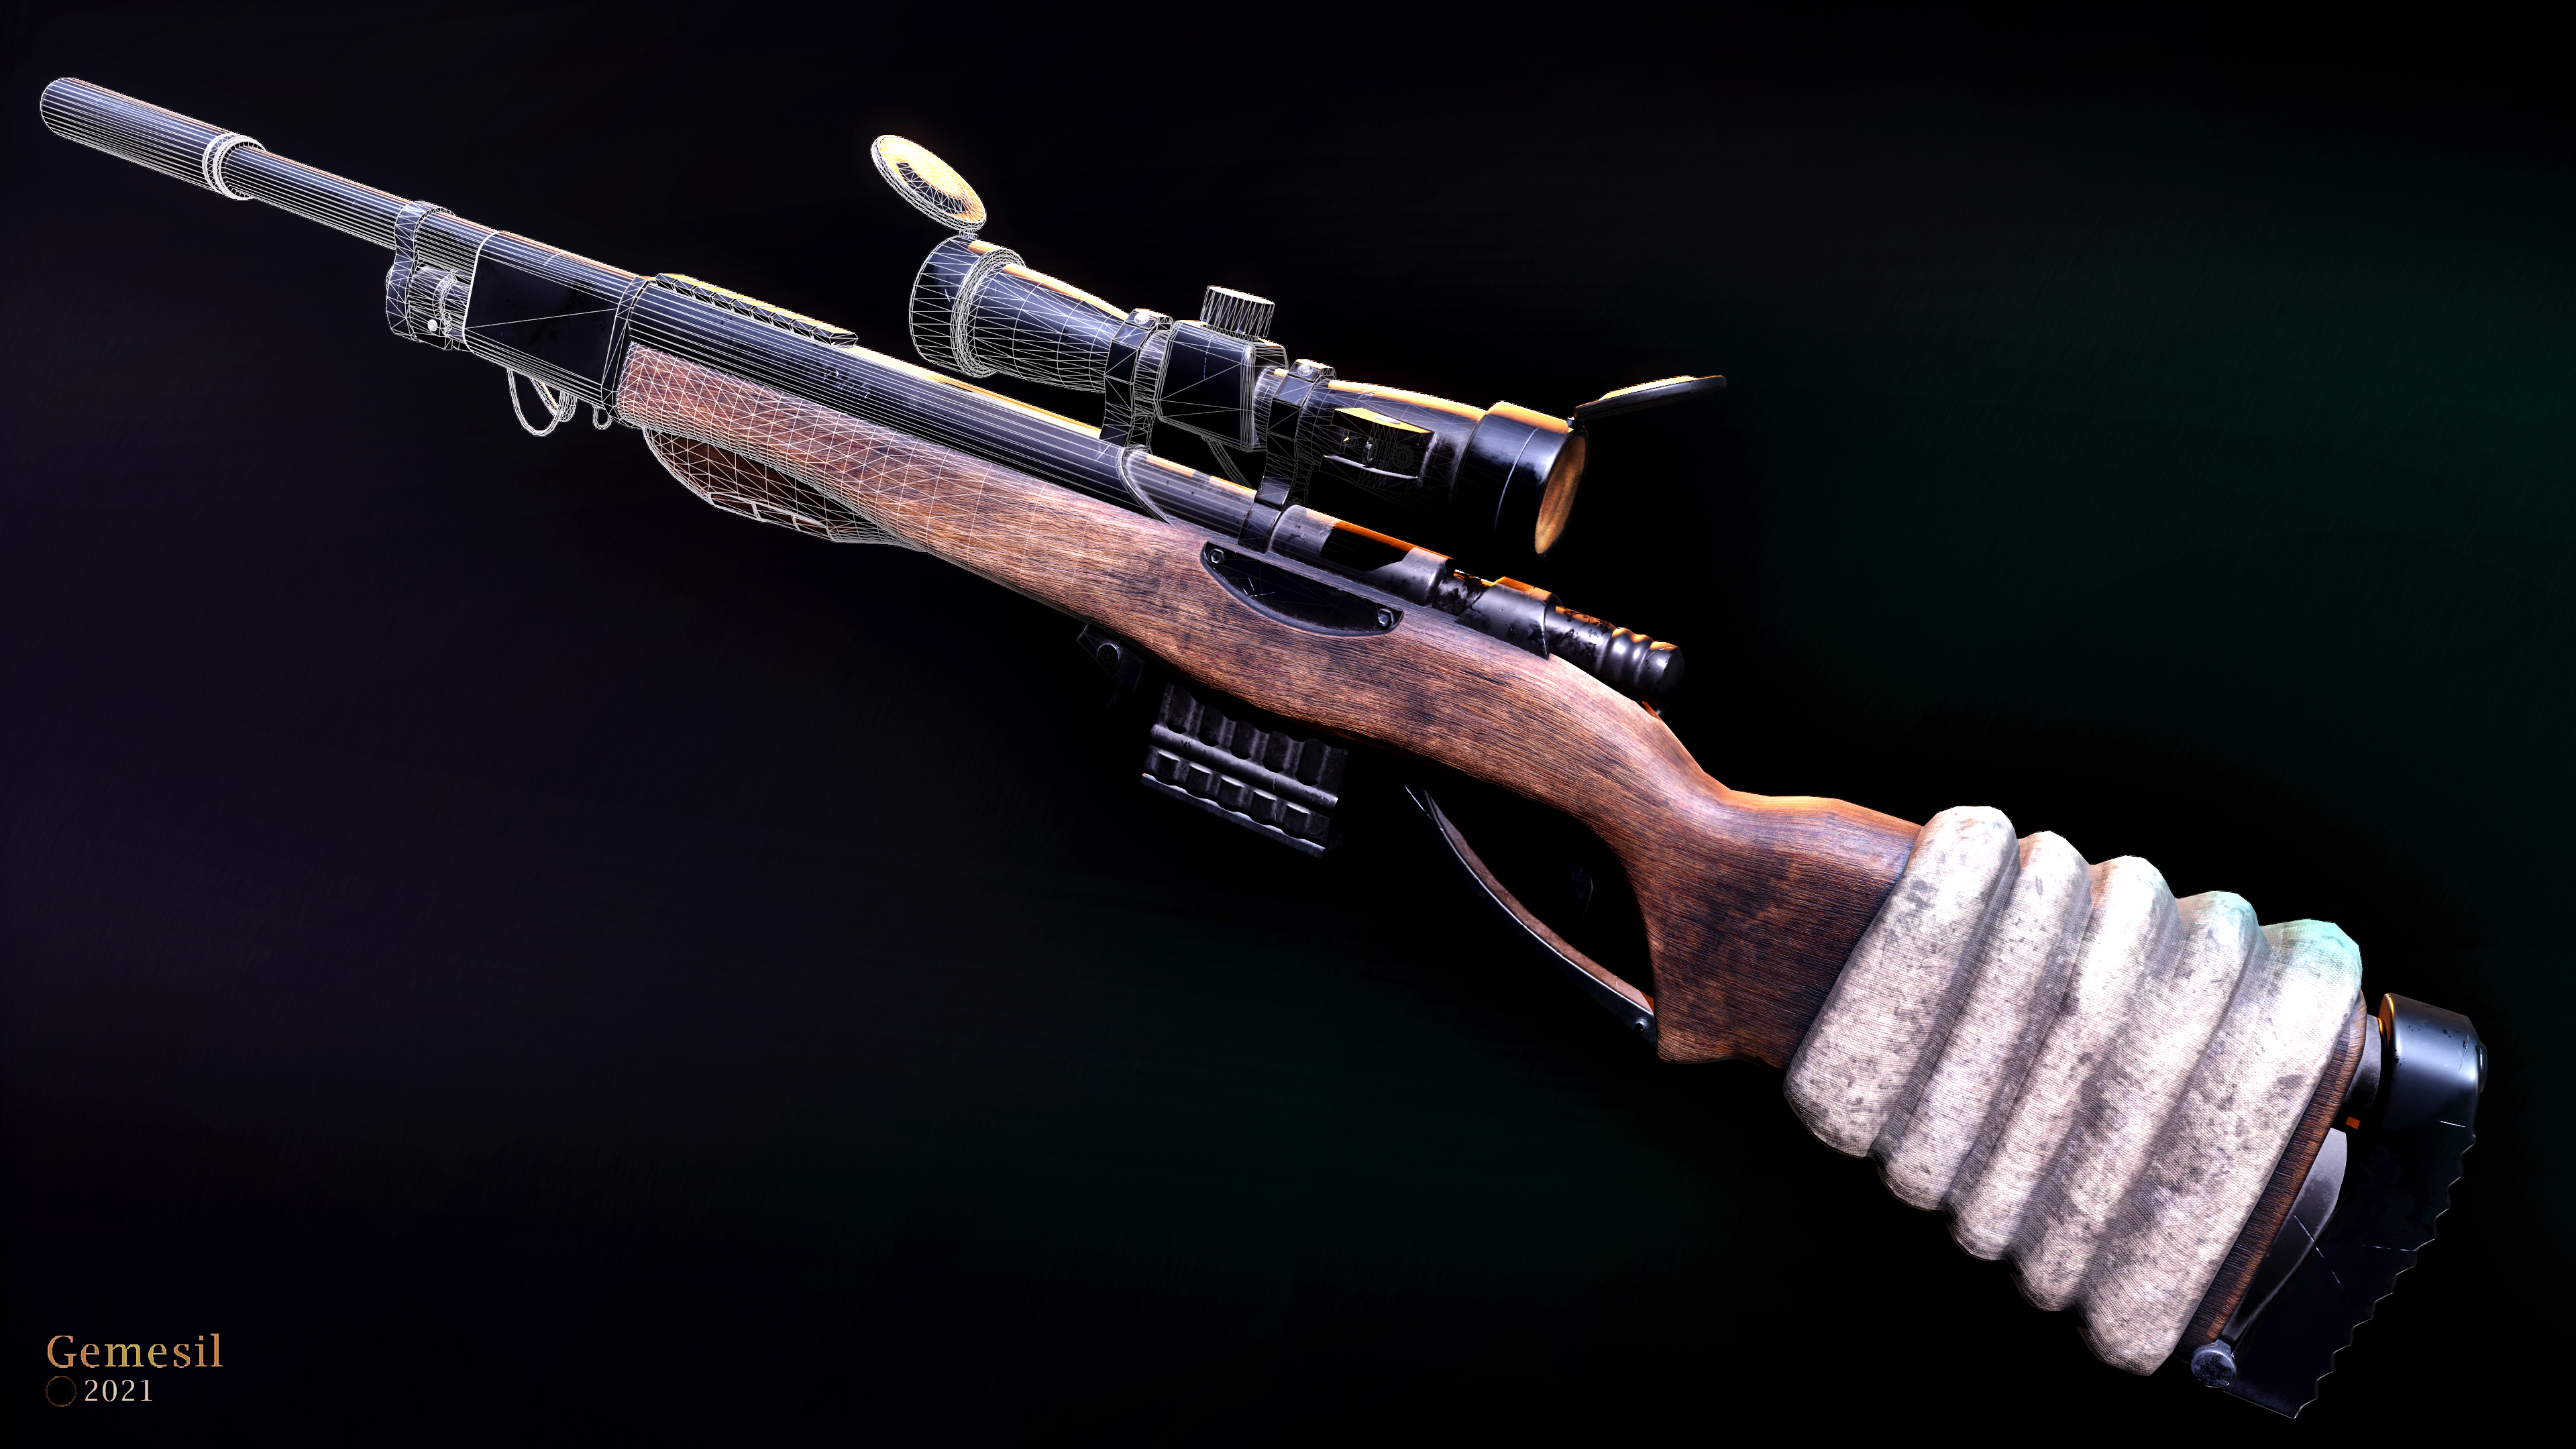 "Outrider" Bolt Action Rifle